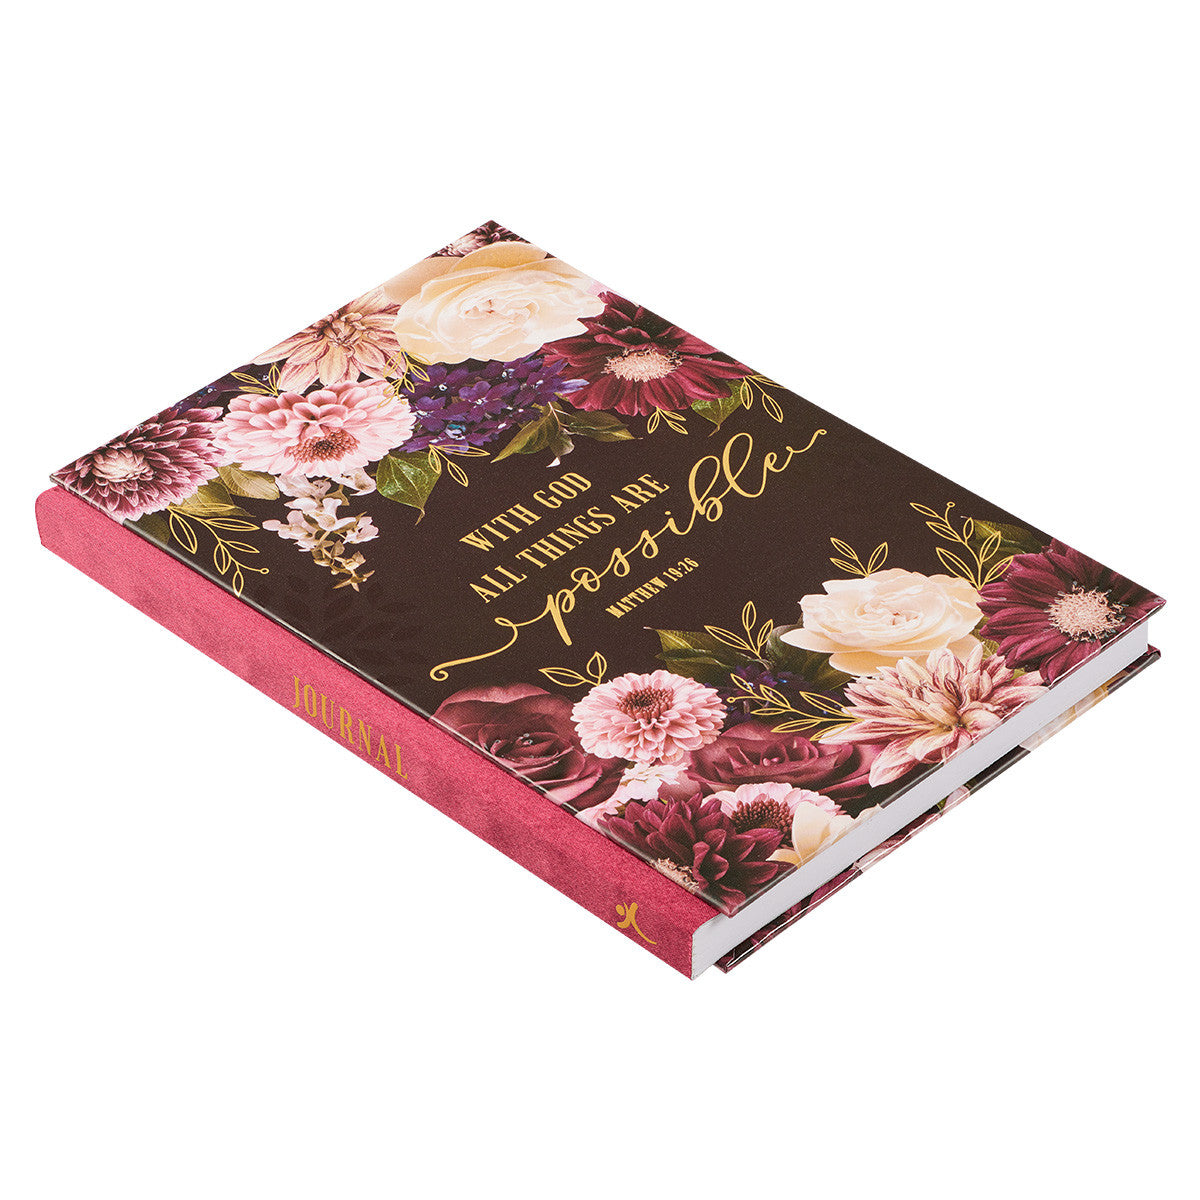 All Things Are Possible Burgundy Floral Quarter-bound Journal - The Christian Gift Company